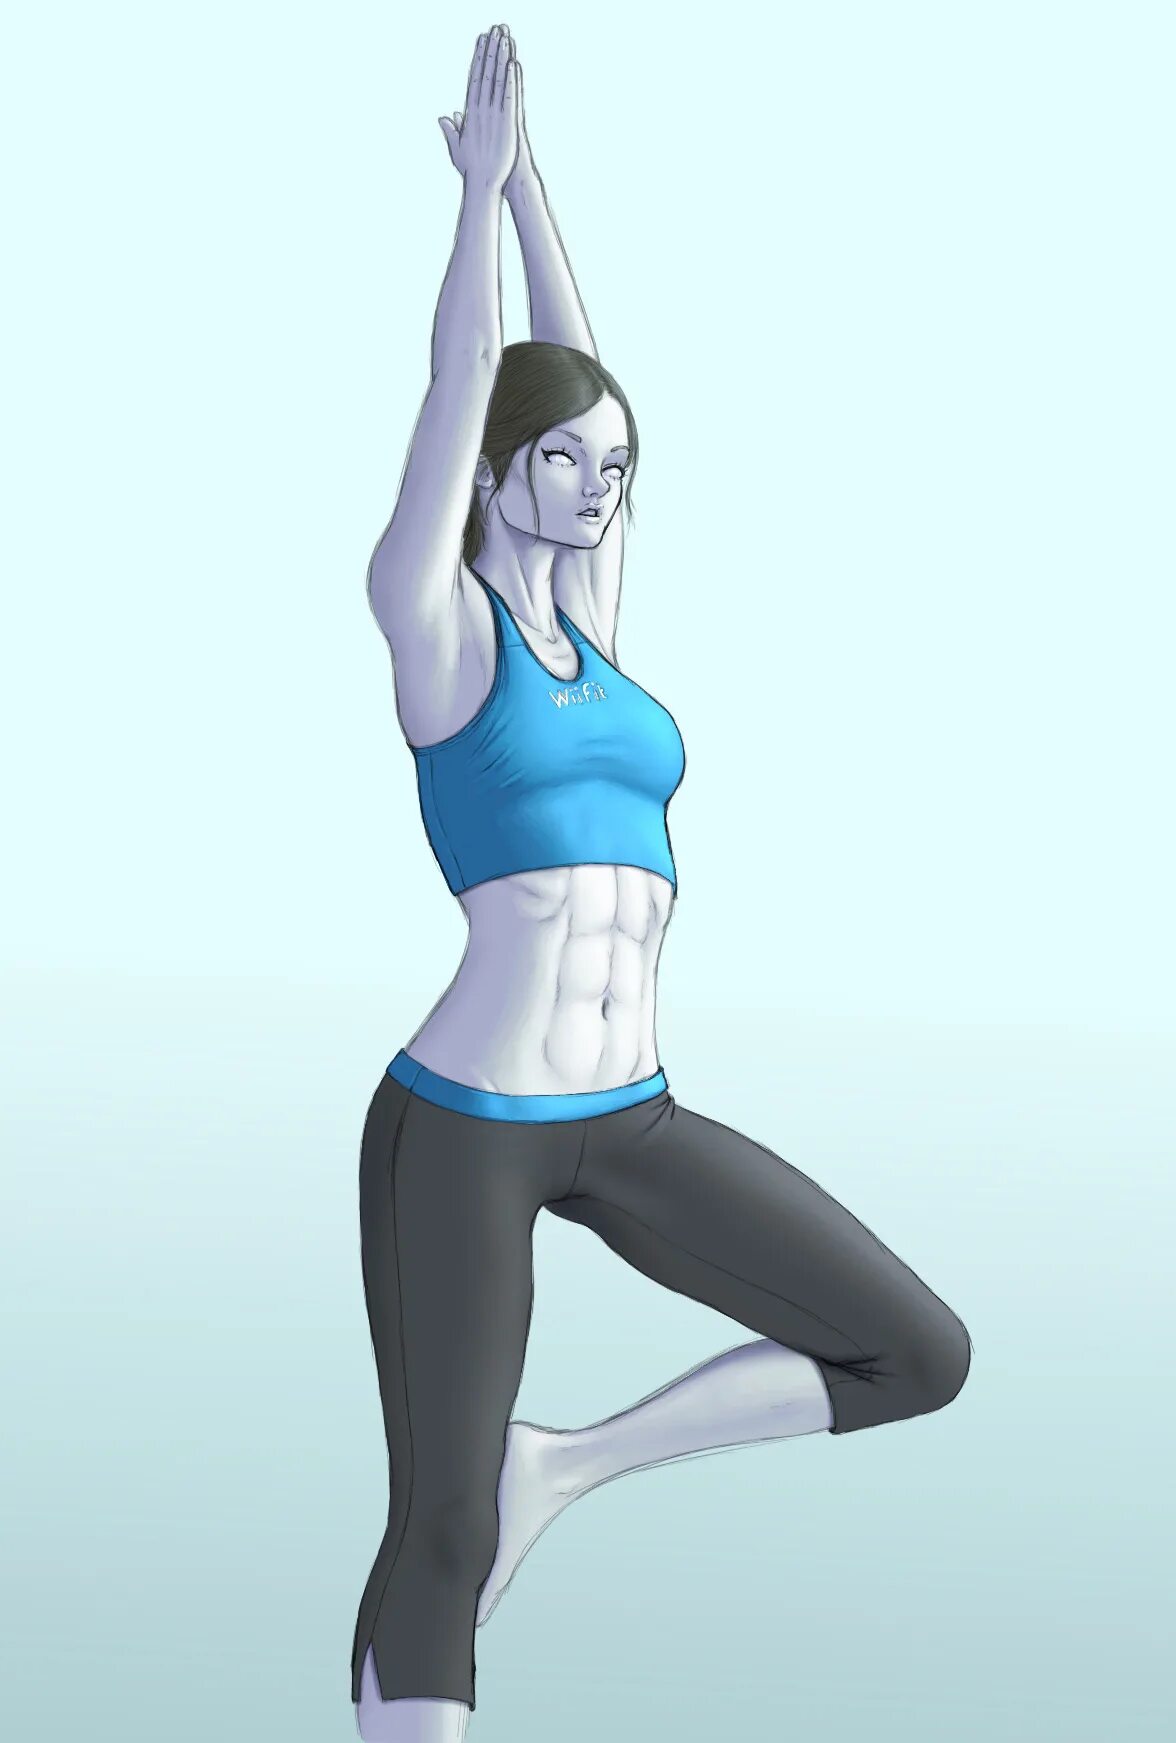 Wii Fit Trainer. Тренер Wii Fit Art. Fat Wii Fit Trainer. Nintendo Wii Fit Trainer.